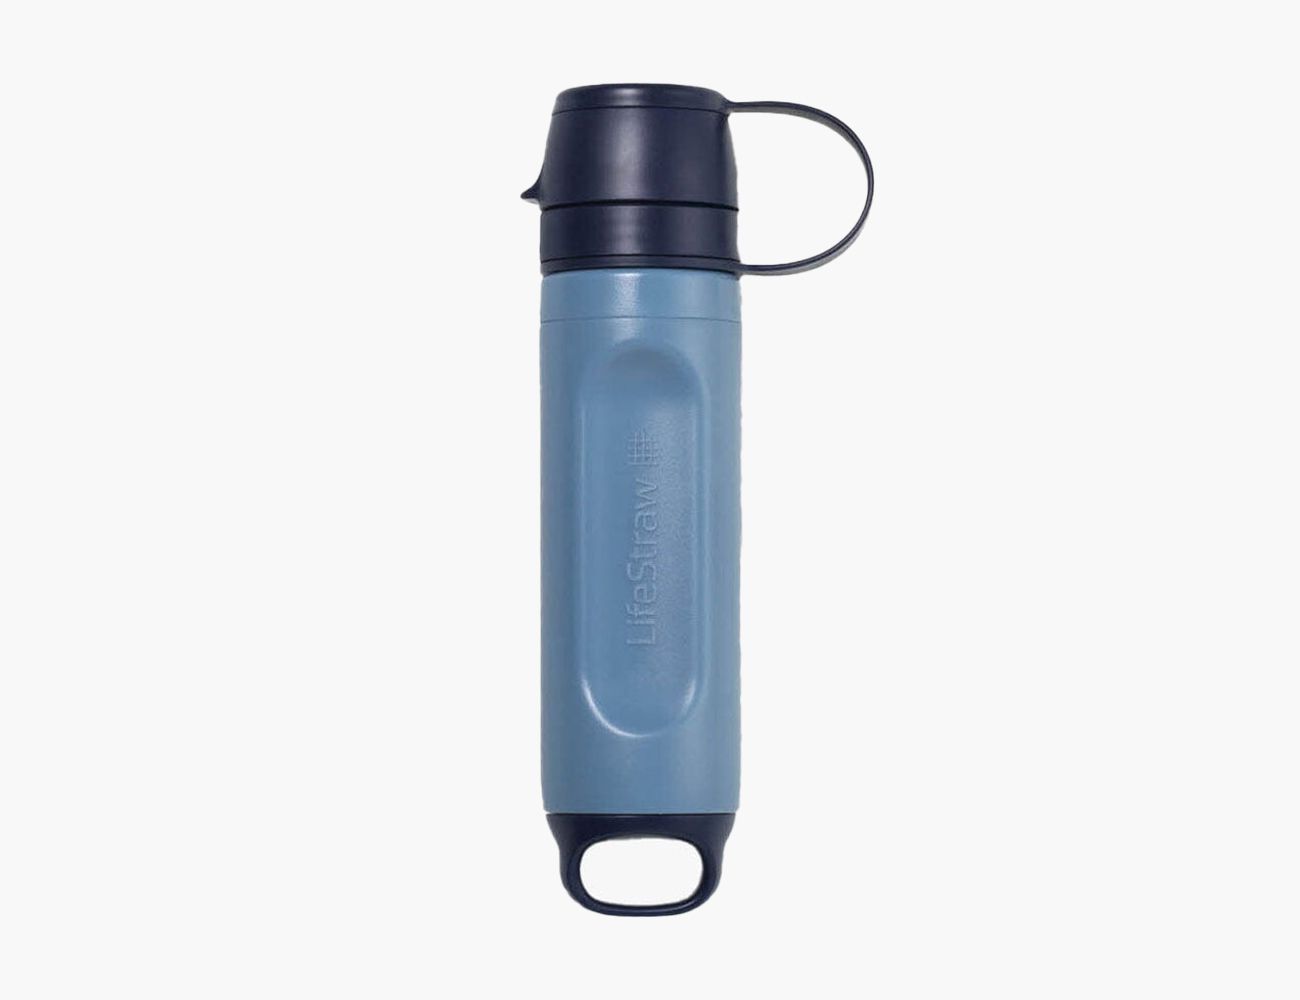 3 Ways to Drink Clean Water with the New Peak Series LifeStraw #LifeStraw # cleanwater @Lifestraw « Adafruit Industries – Makers, hackers, artists,  designers and engineers!